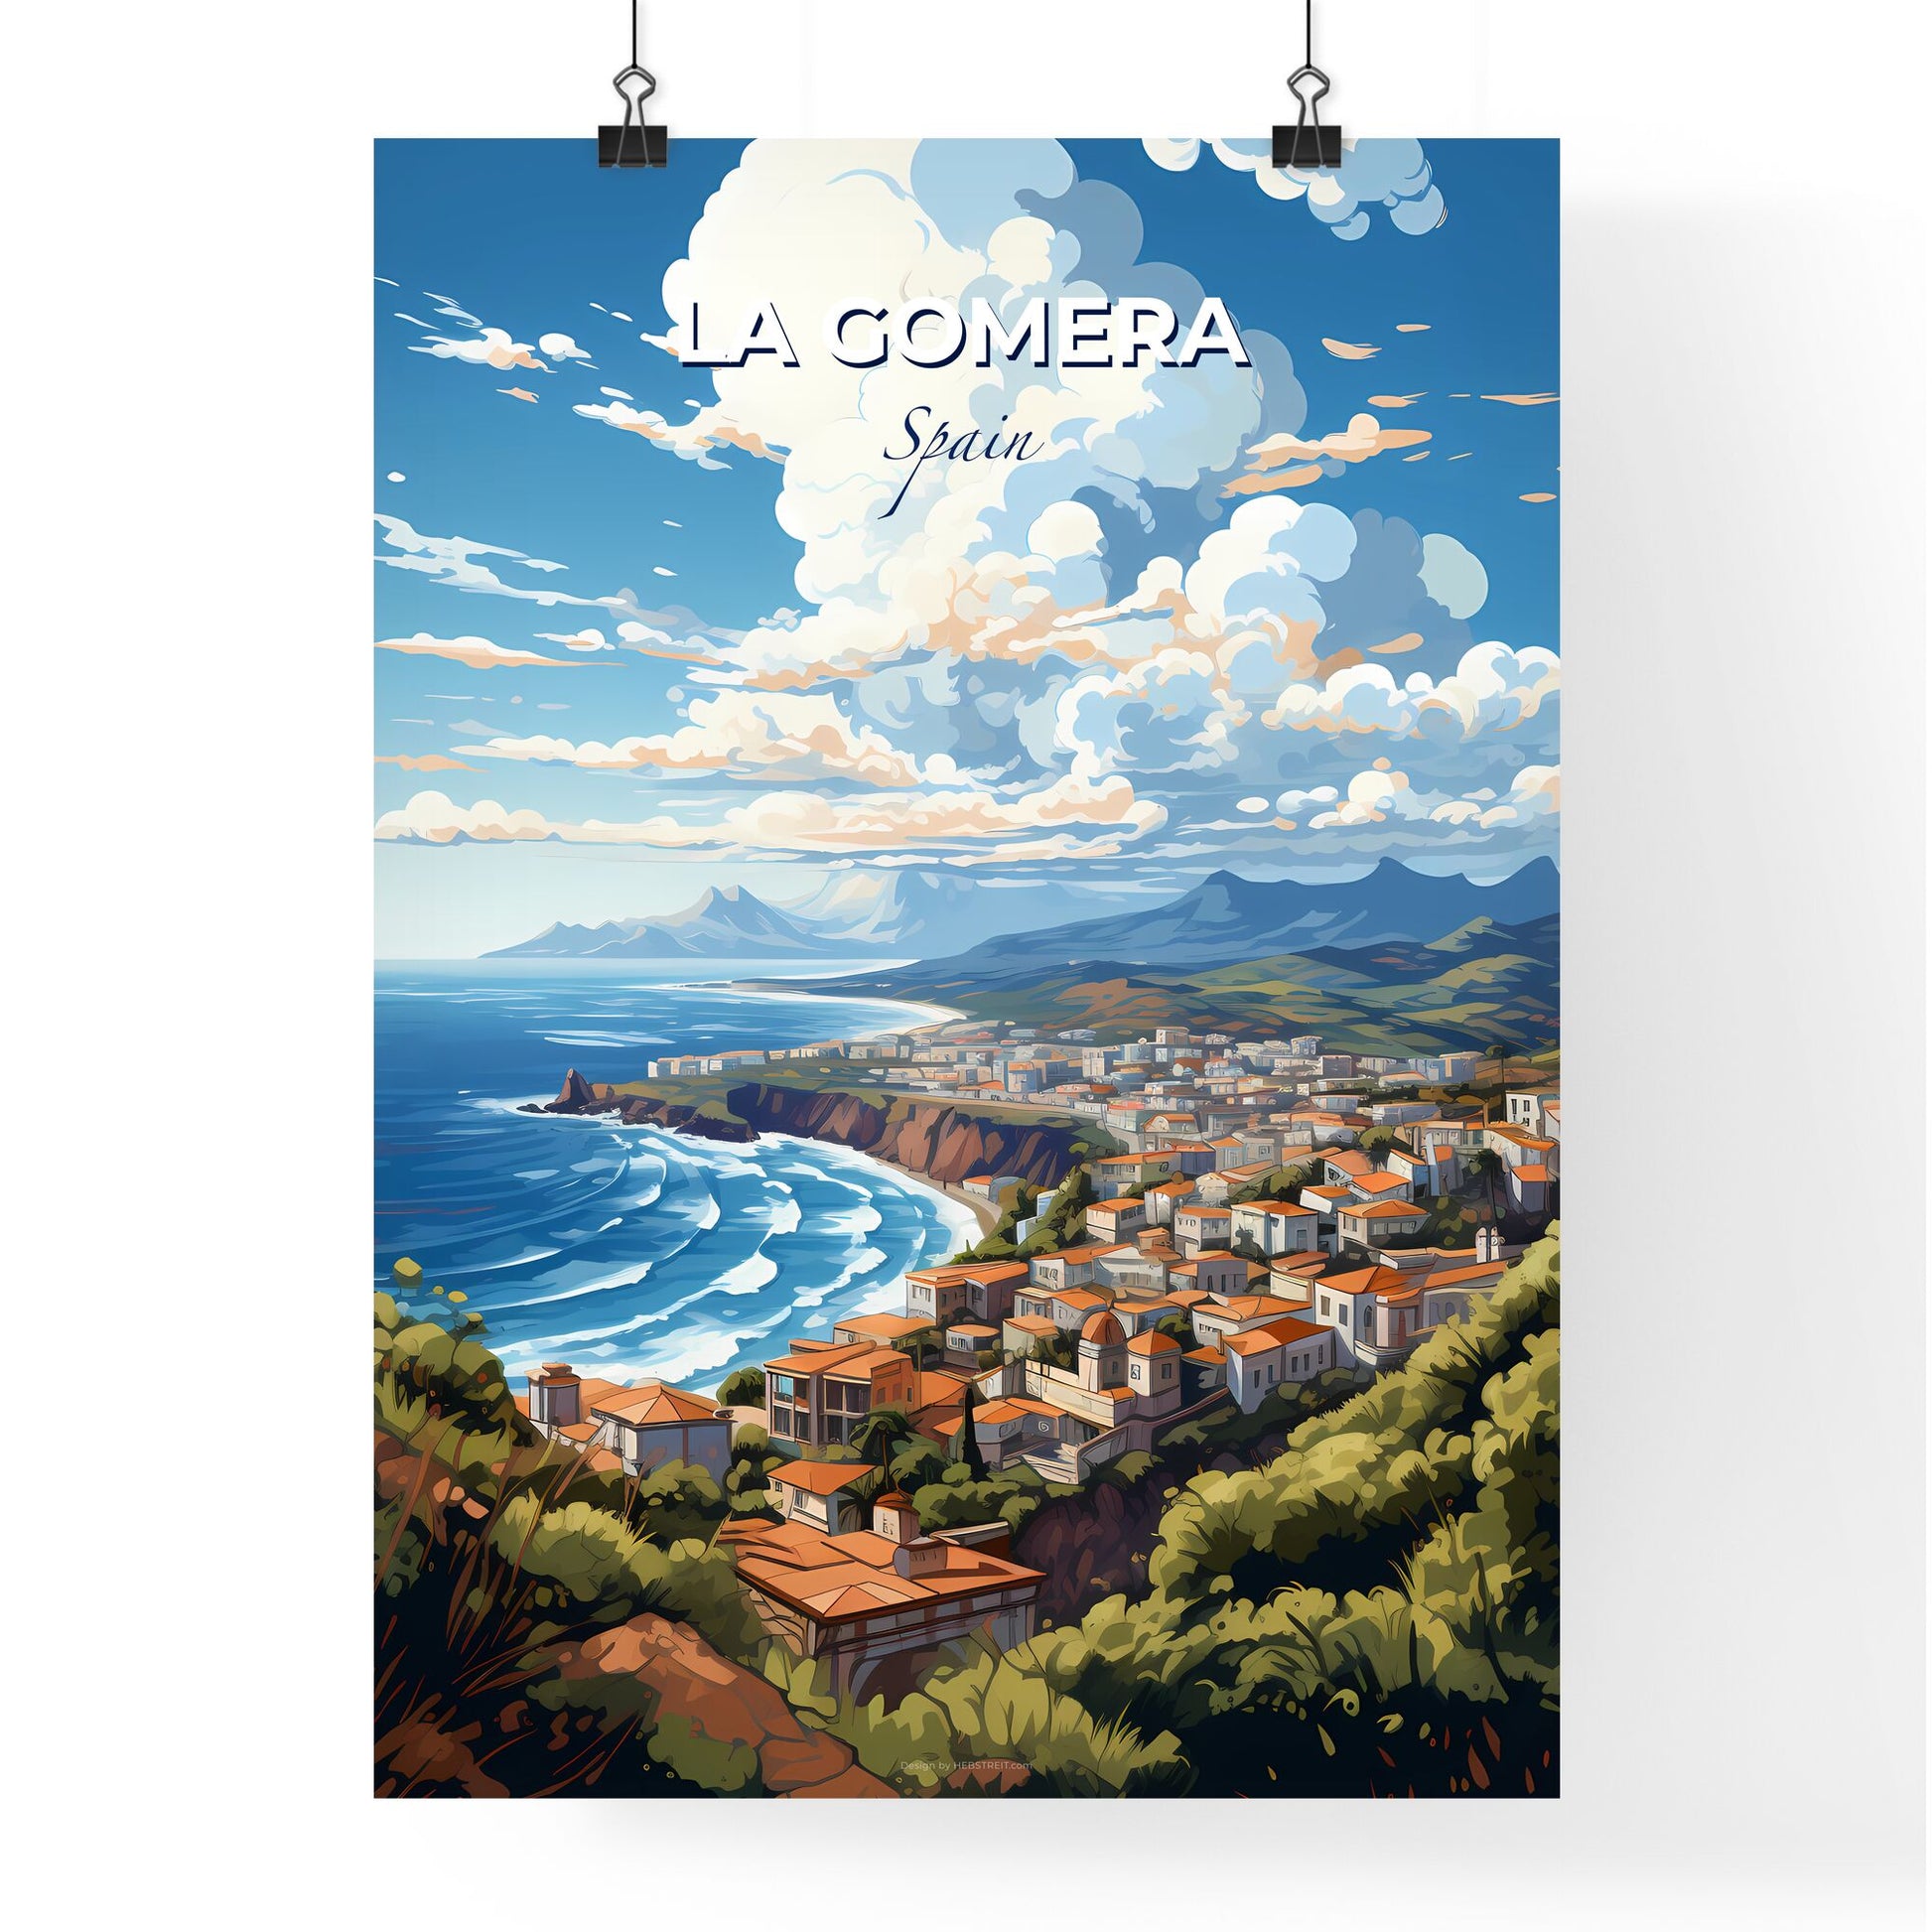 La Gomera Spain Skyline - A Landscape Of A Town On A Cliff By The Ocean - Customizable Travel Gift Default Title